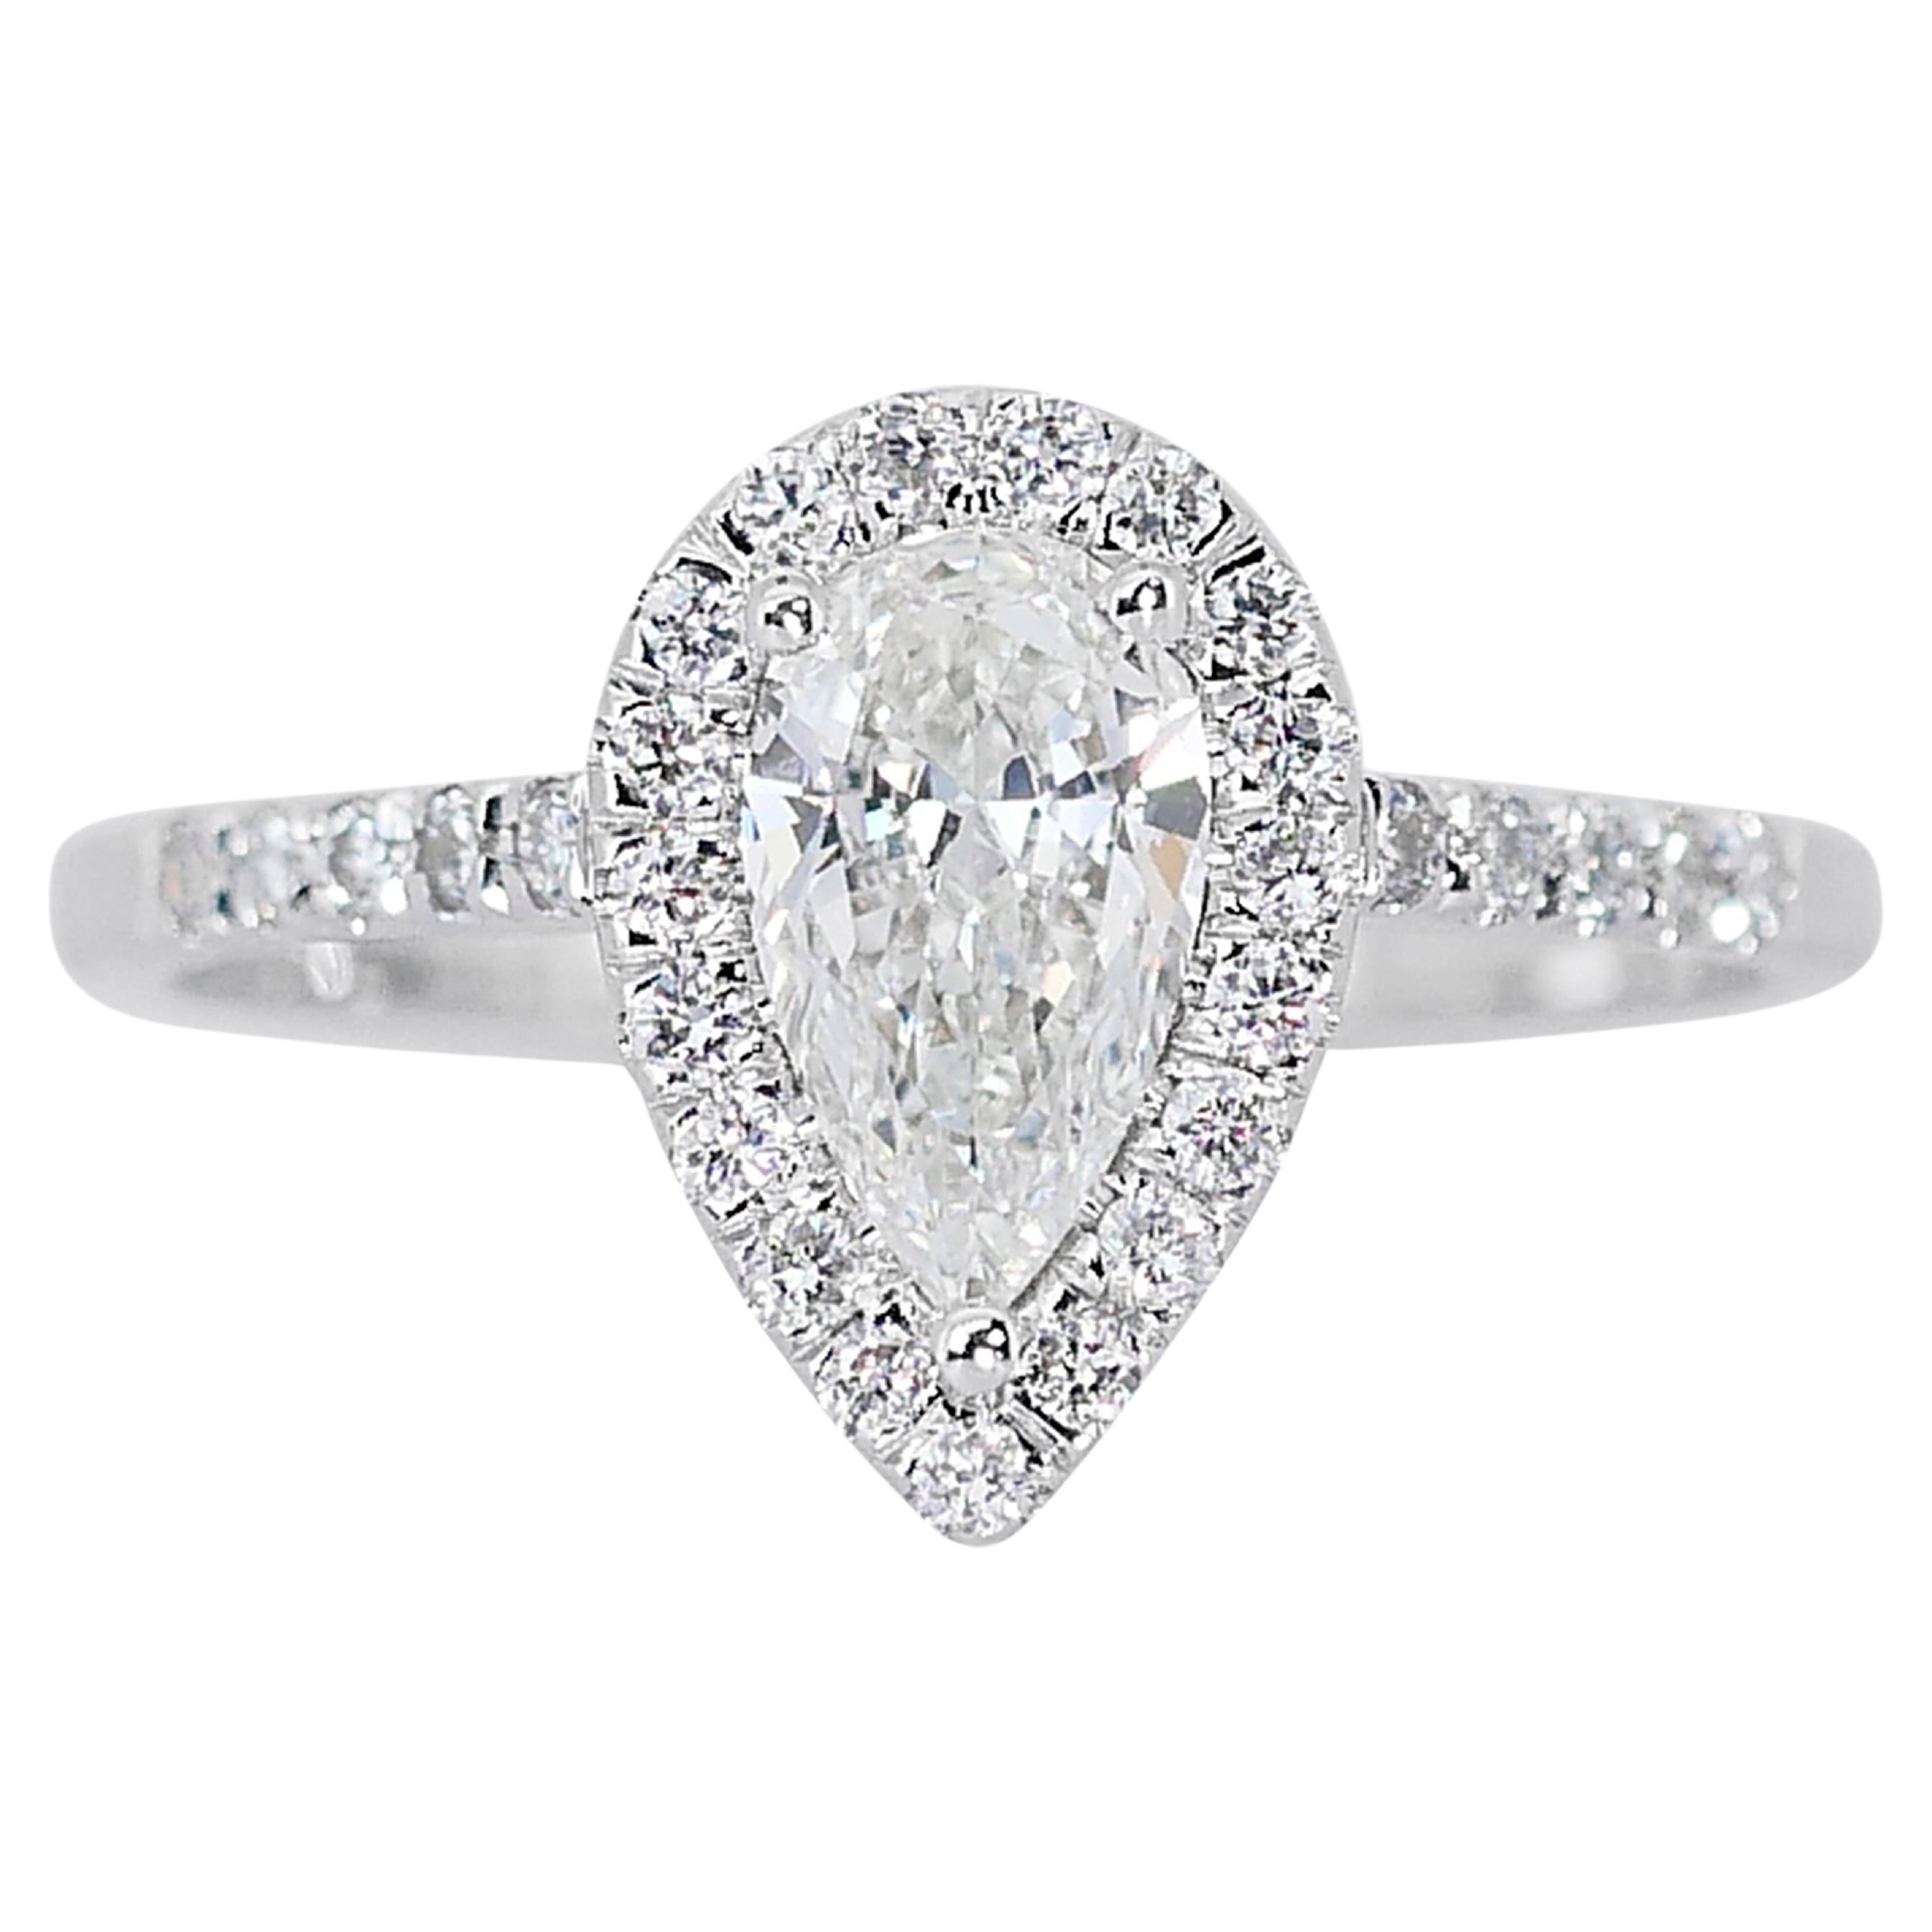 Stunning 1.97ct Pear-Shaped Diamond Halo Ring in 18k White Gold - GIA Certified

This captivating diamond halo ring, crafted in sleek 18k white gold, features a remarkable 1.50-carat pear-shaped diamond that radiates unmatched brilliance.